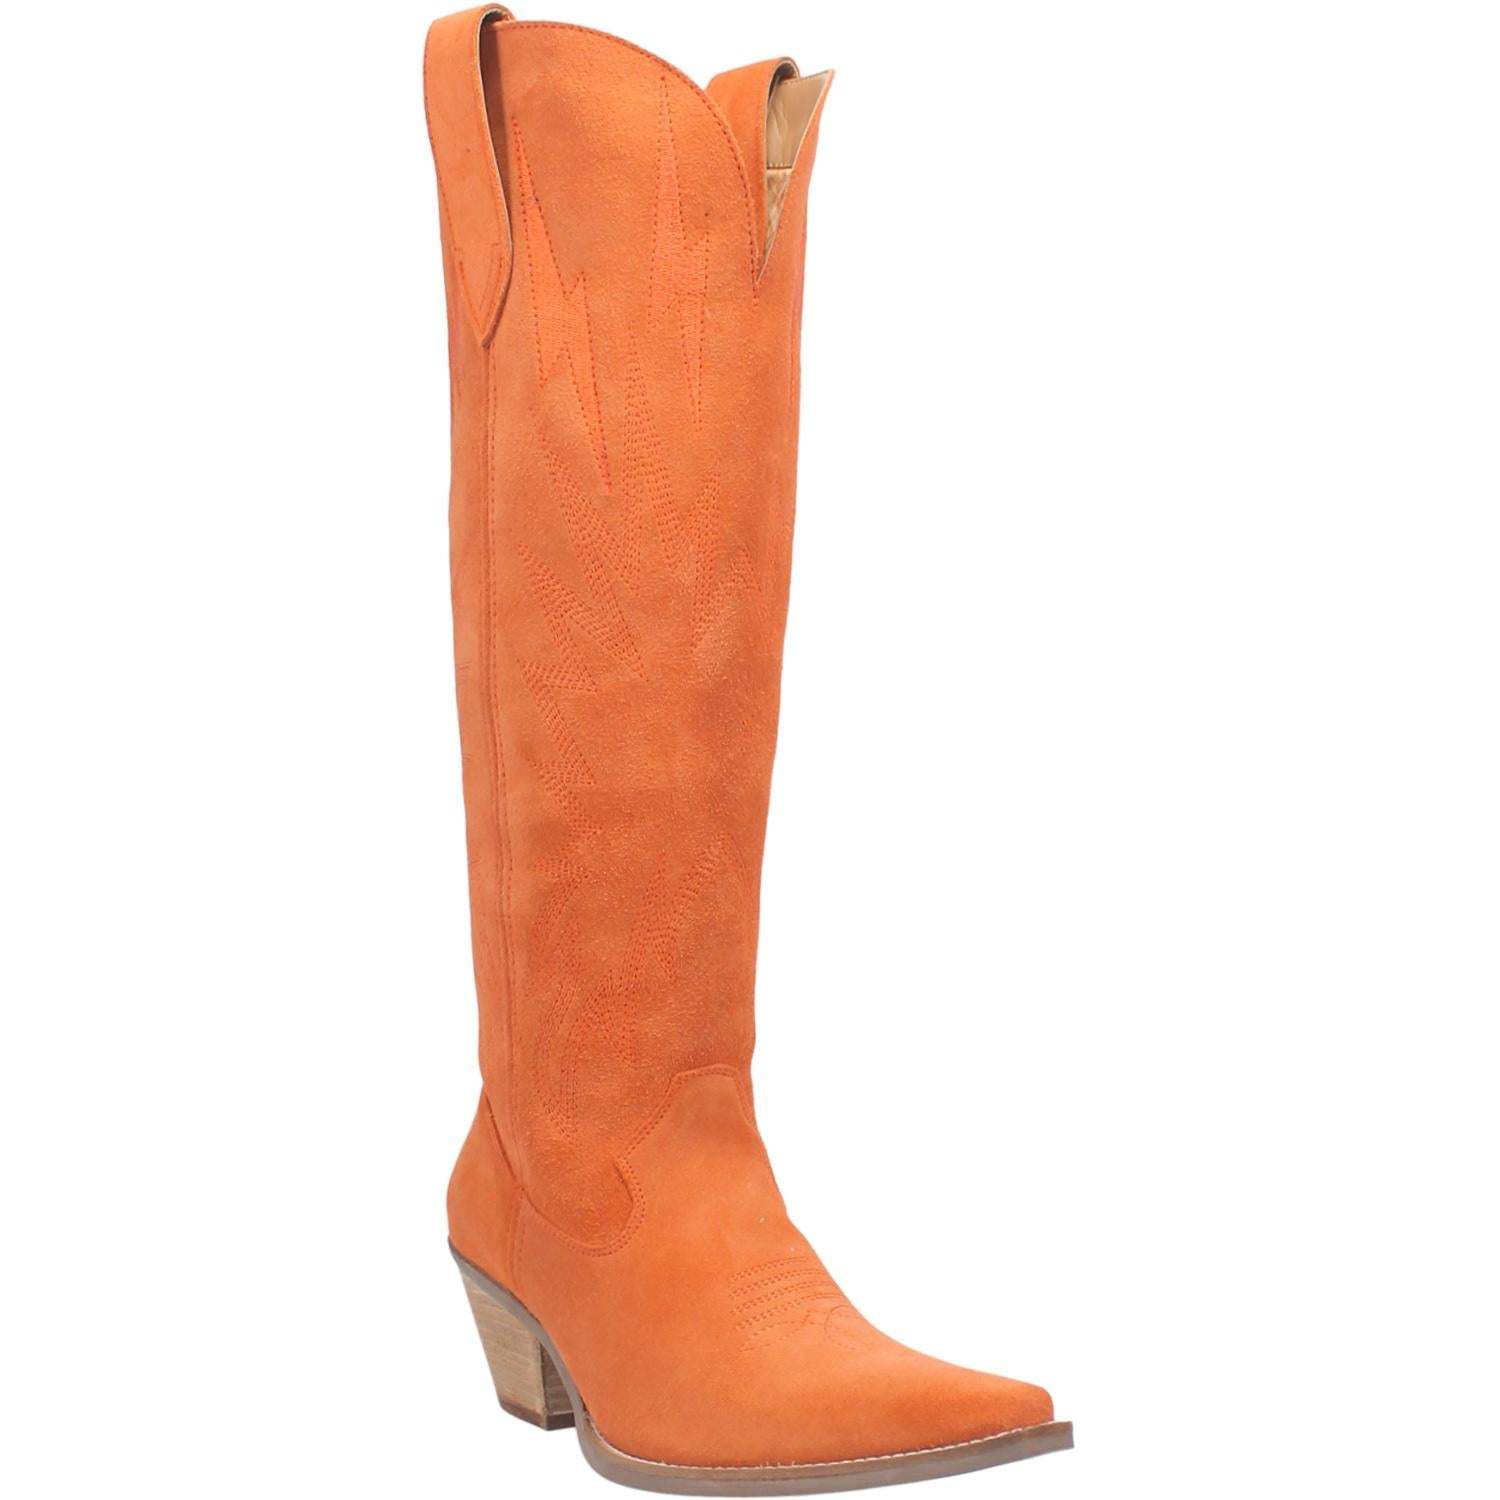 A tall orange boot featuring rhinestone lightning designs, small heel, leather straps, and a V cut at the top. Item is pictured on a plain white background